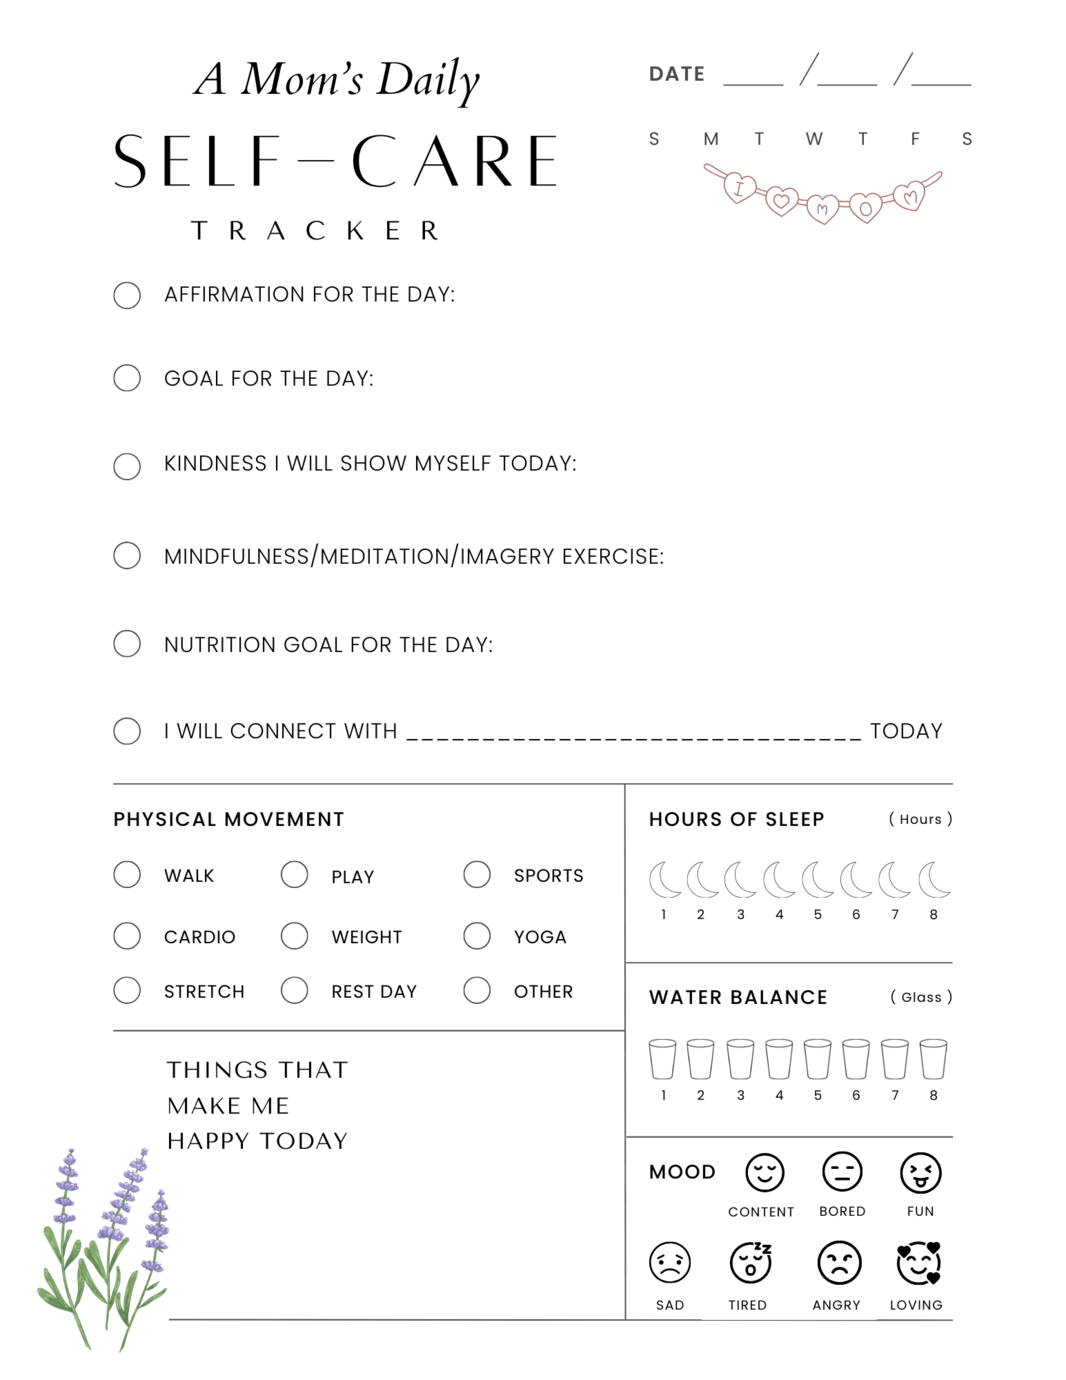 A Mom's Daily Self-Care Tracker png